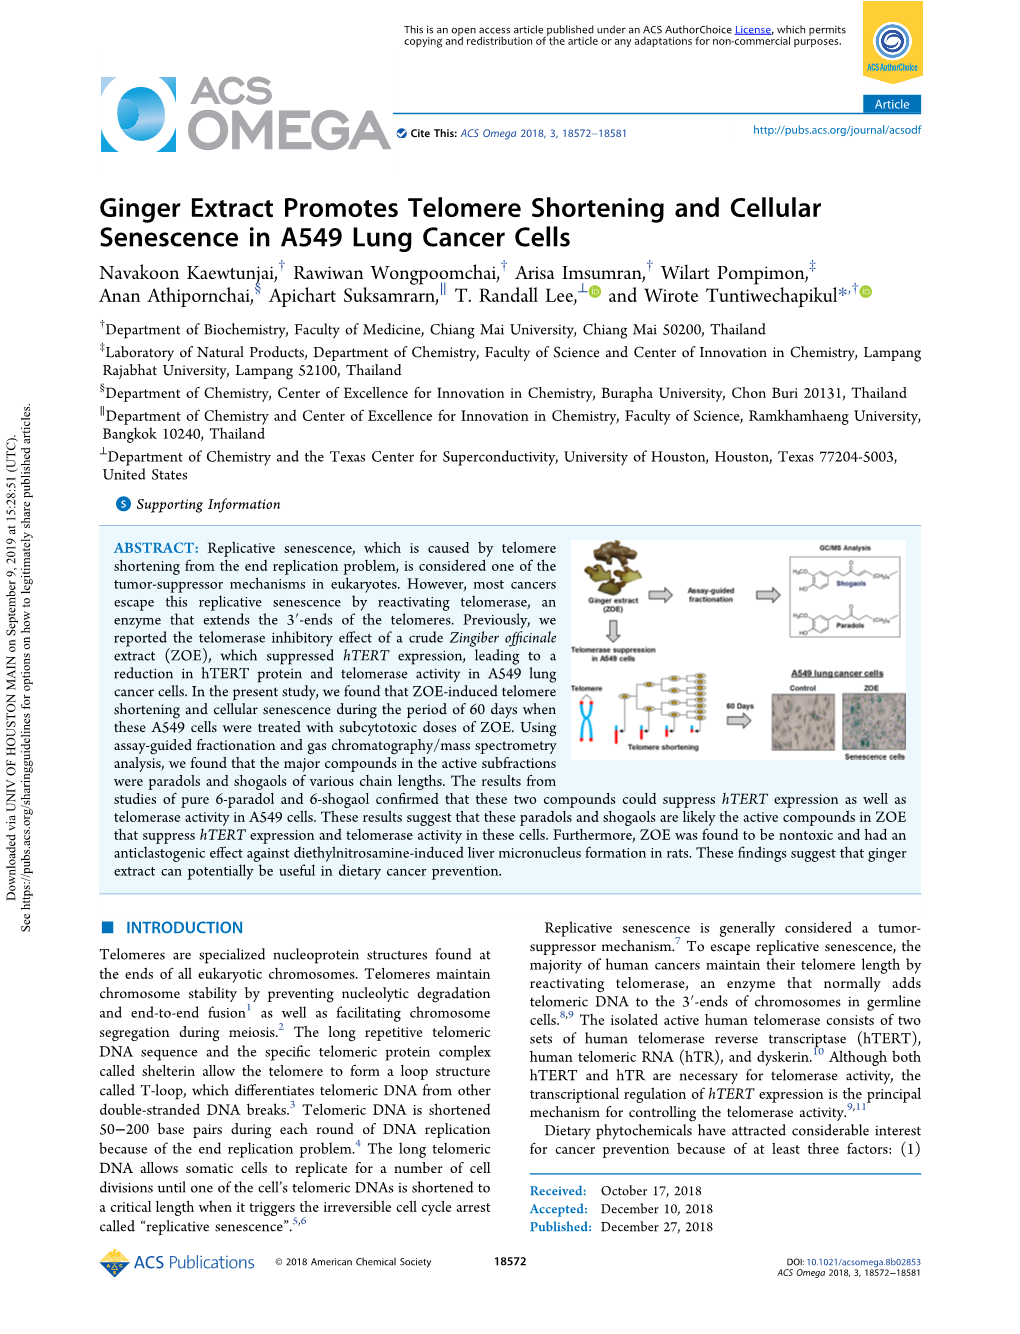 Ginger Extract Promotes Telomere Shortening and Cellular